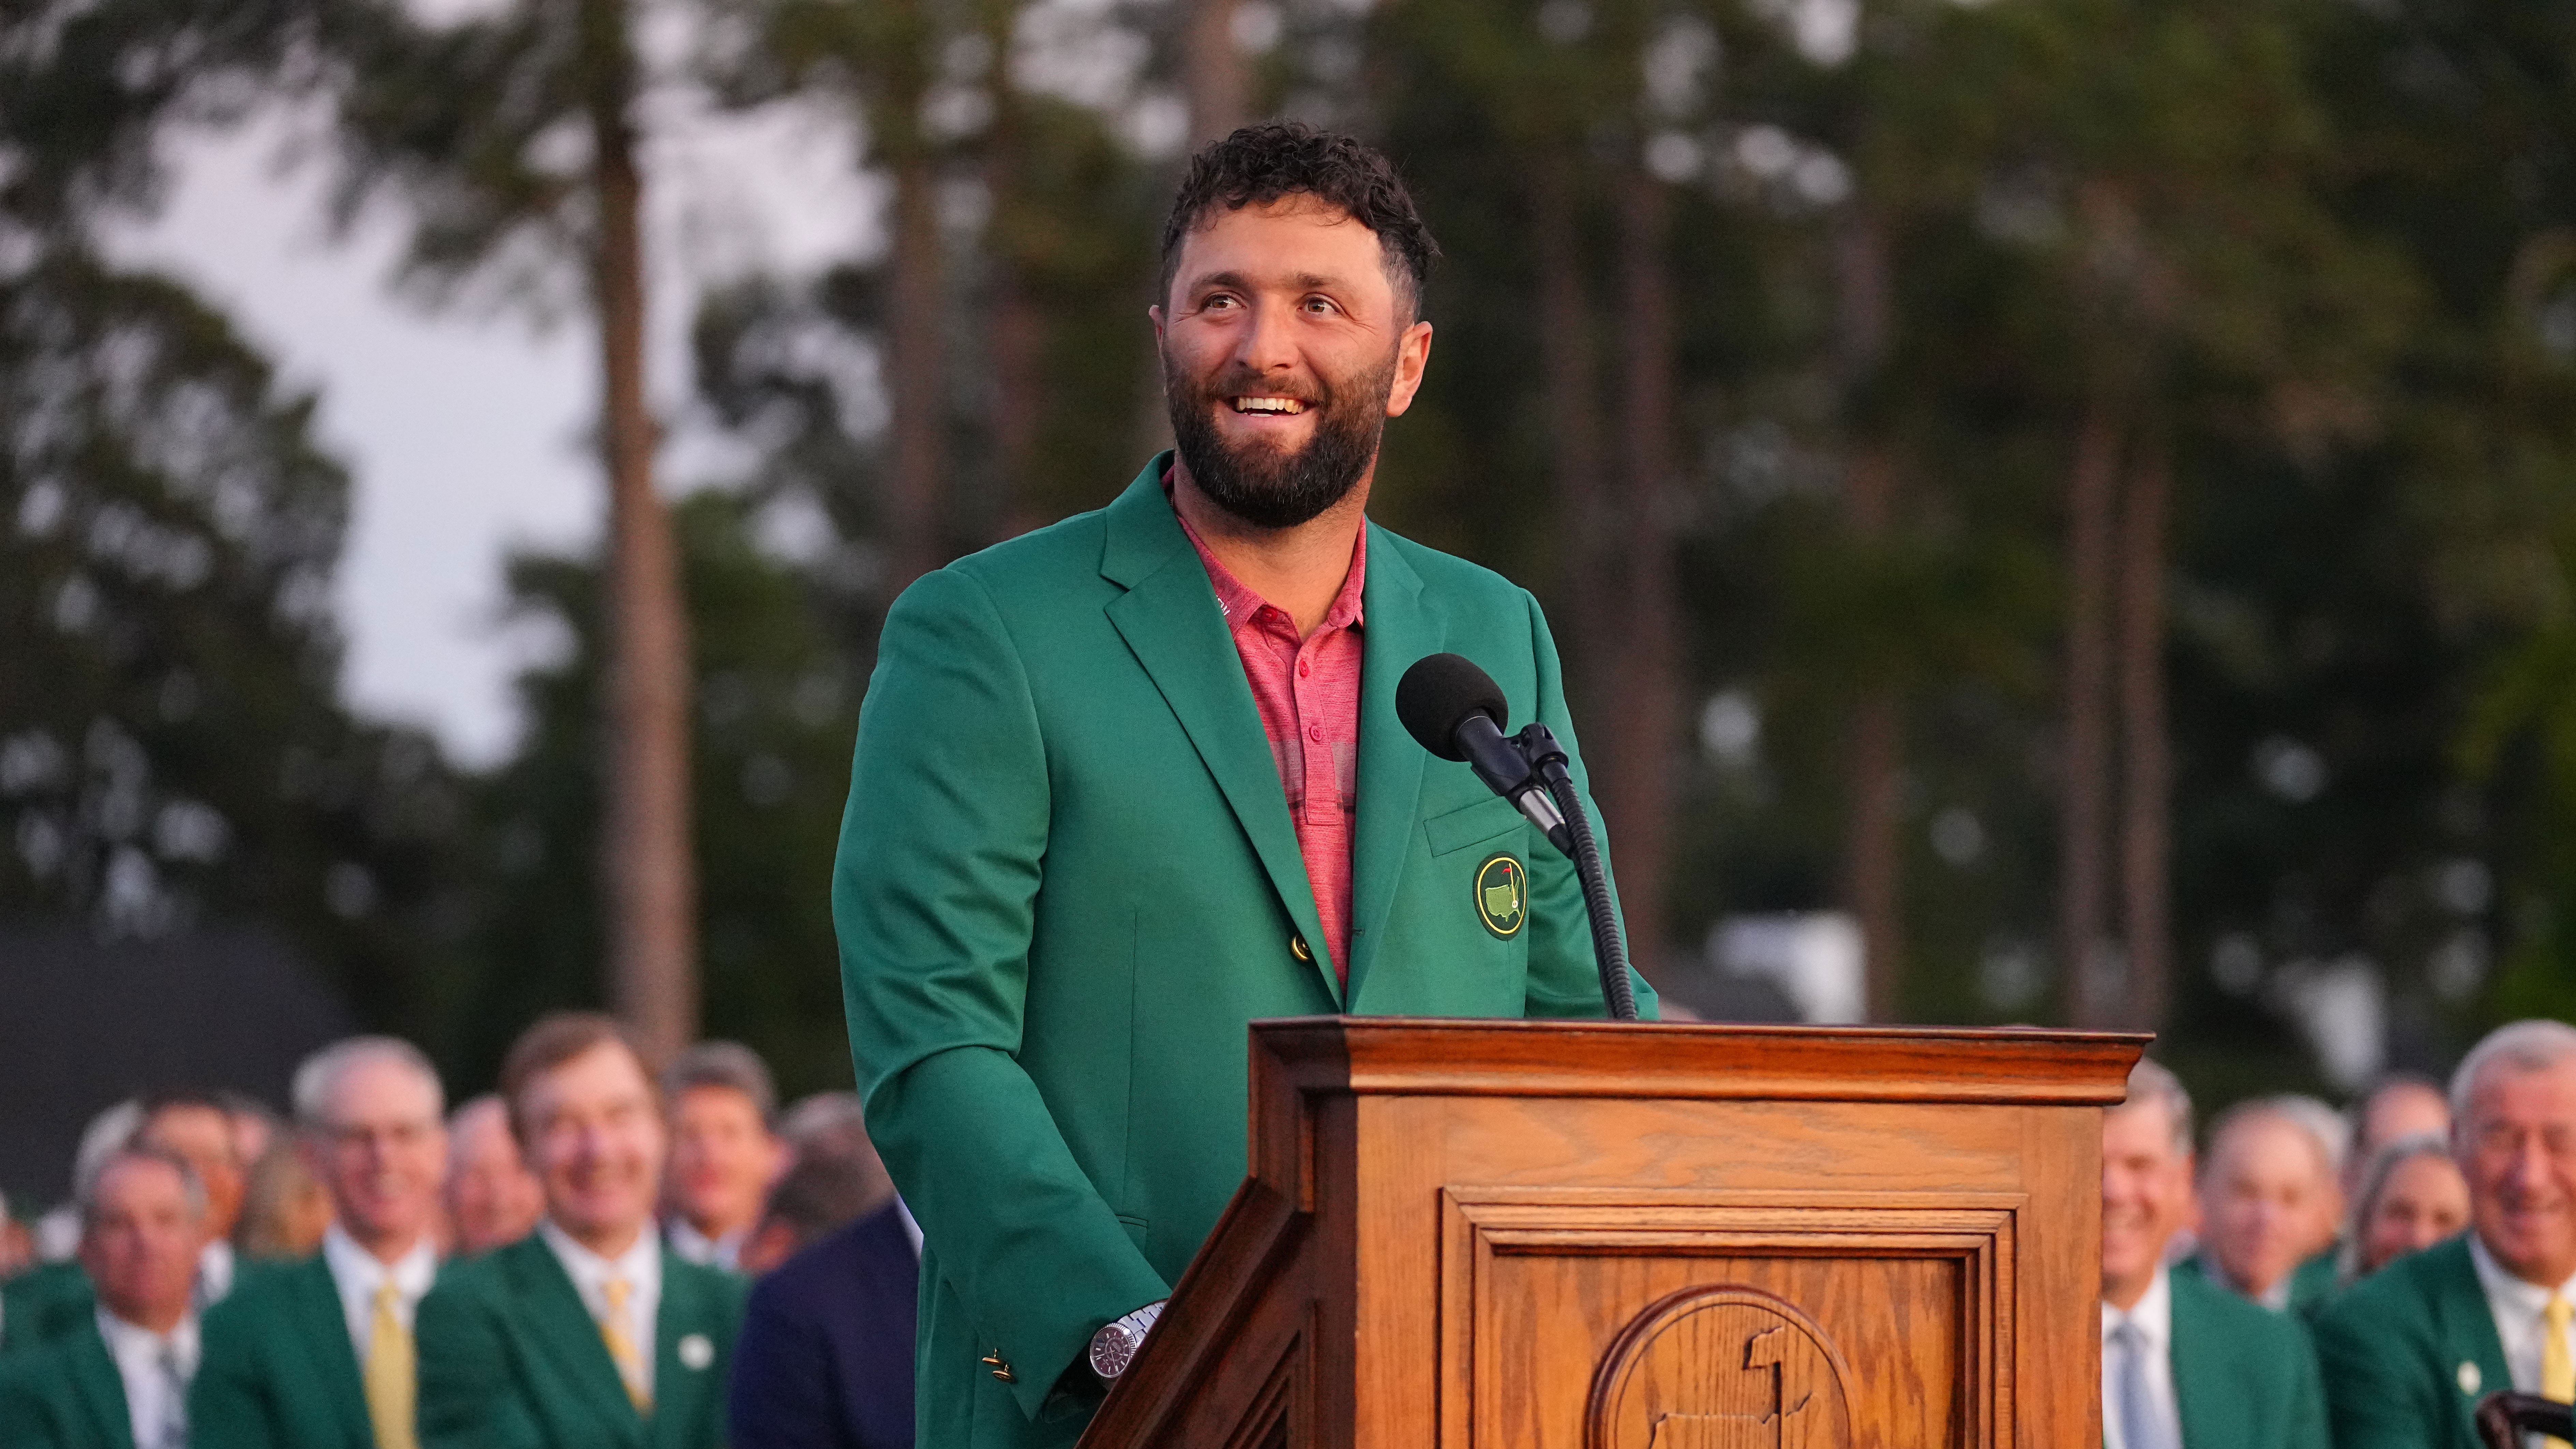 2023 Masters field: Here's who qualified to play in the tournament